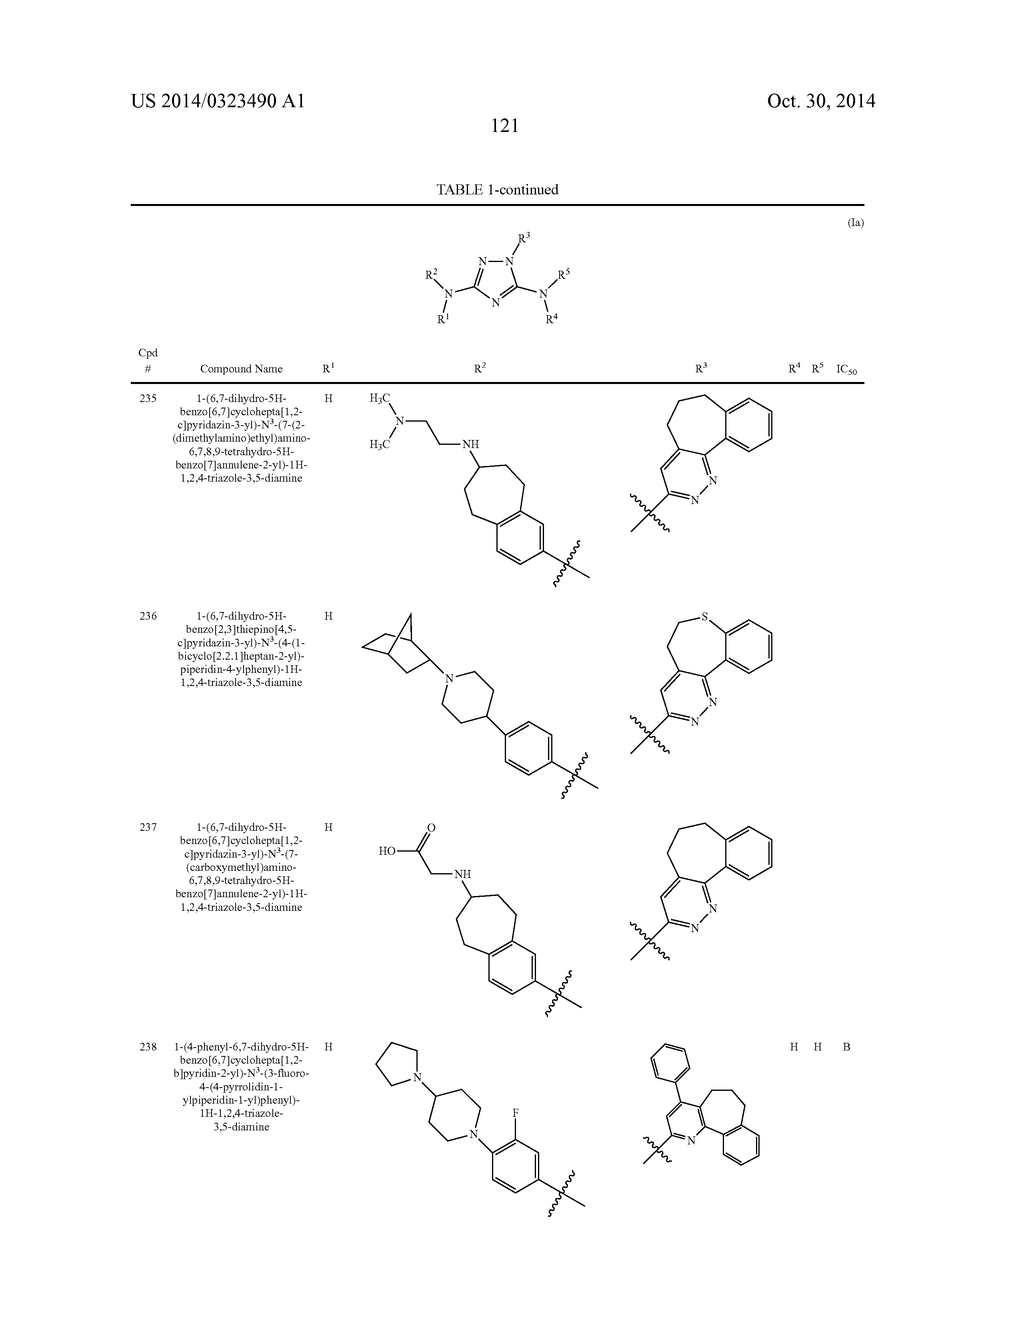 POLYCYCLIC HETEROARYL SUBSTITUTED TRIAZOLES USEFUL AS AXL INHIBITORS - diagram, schematic, and image 122